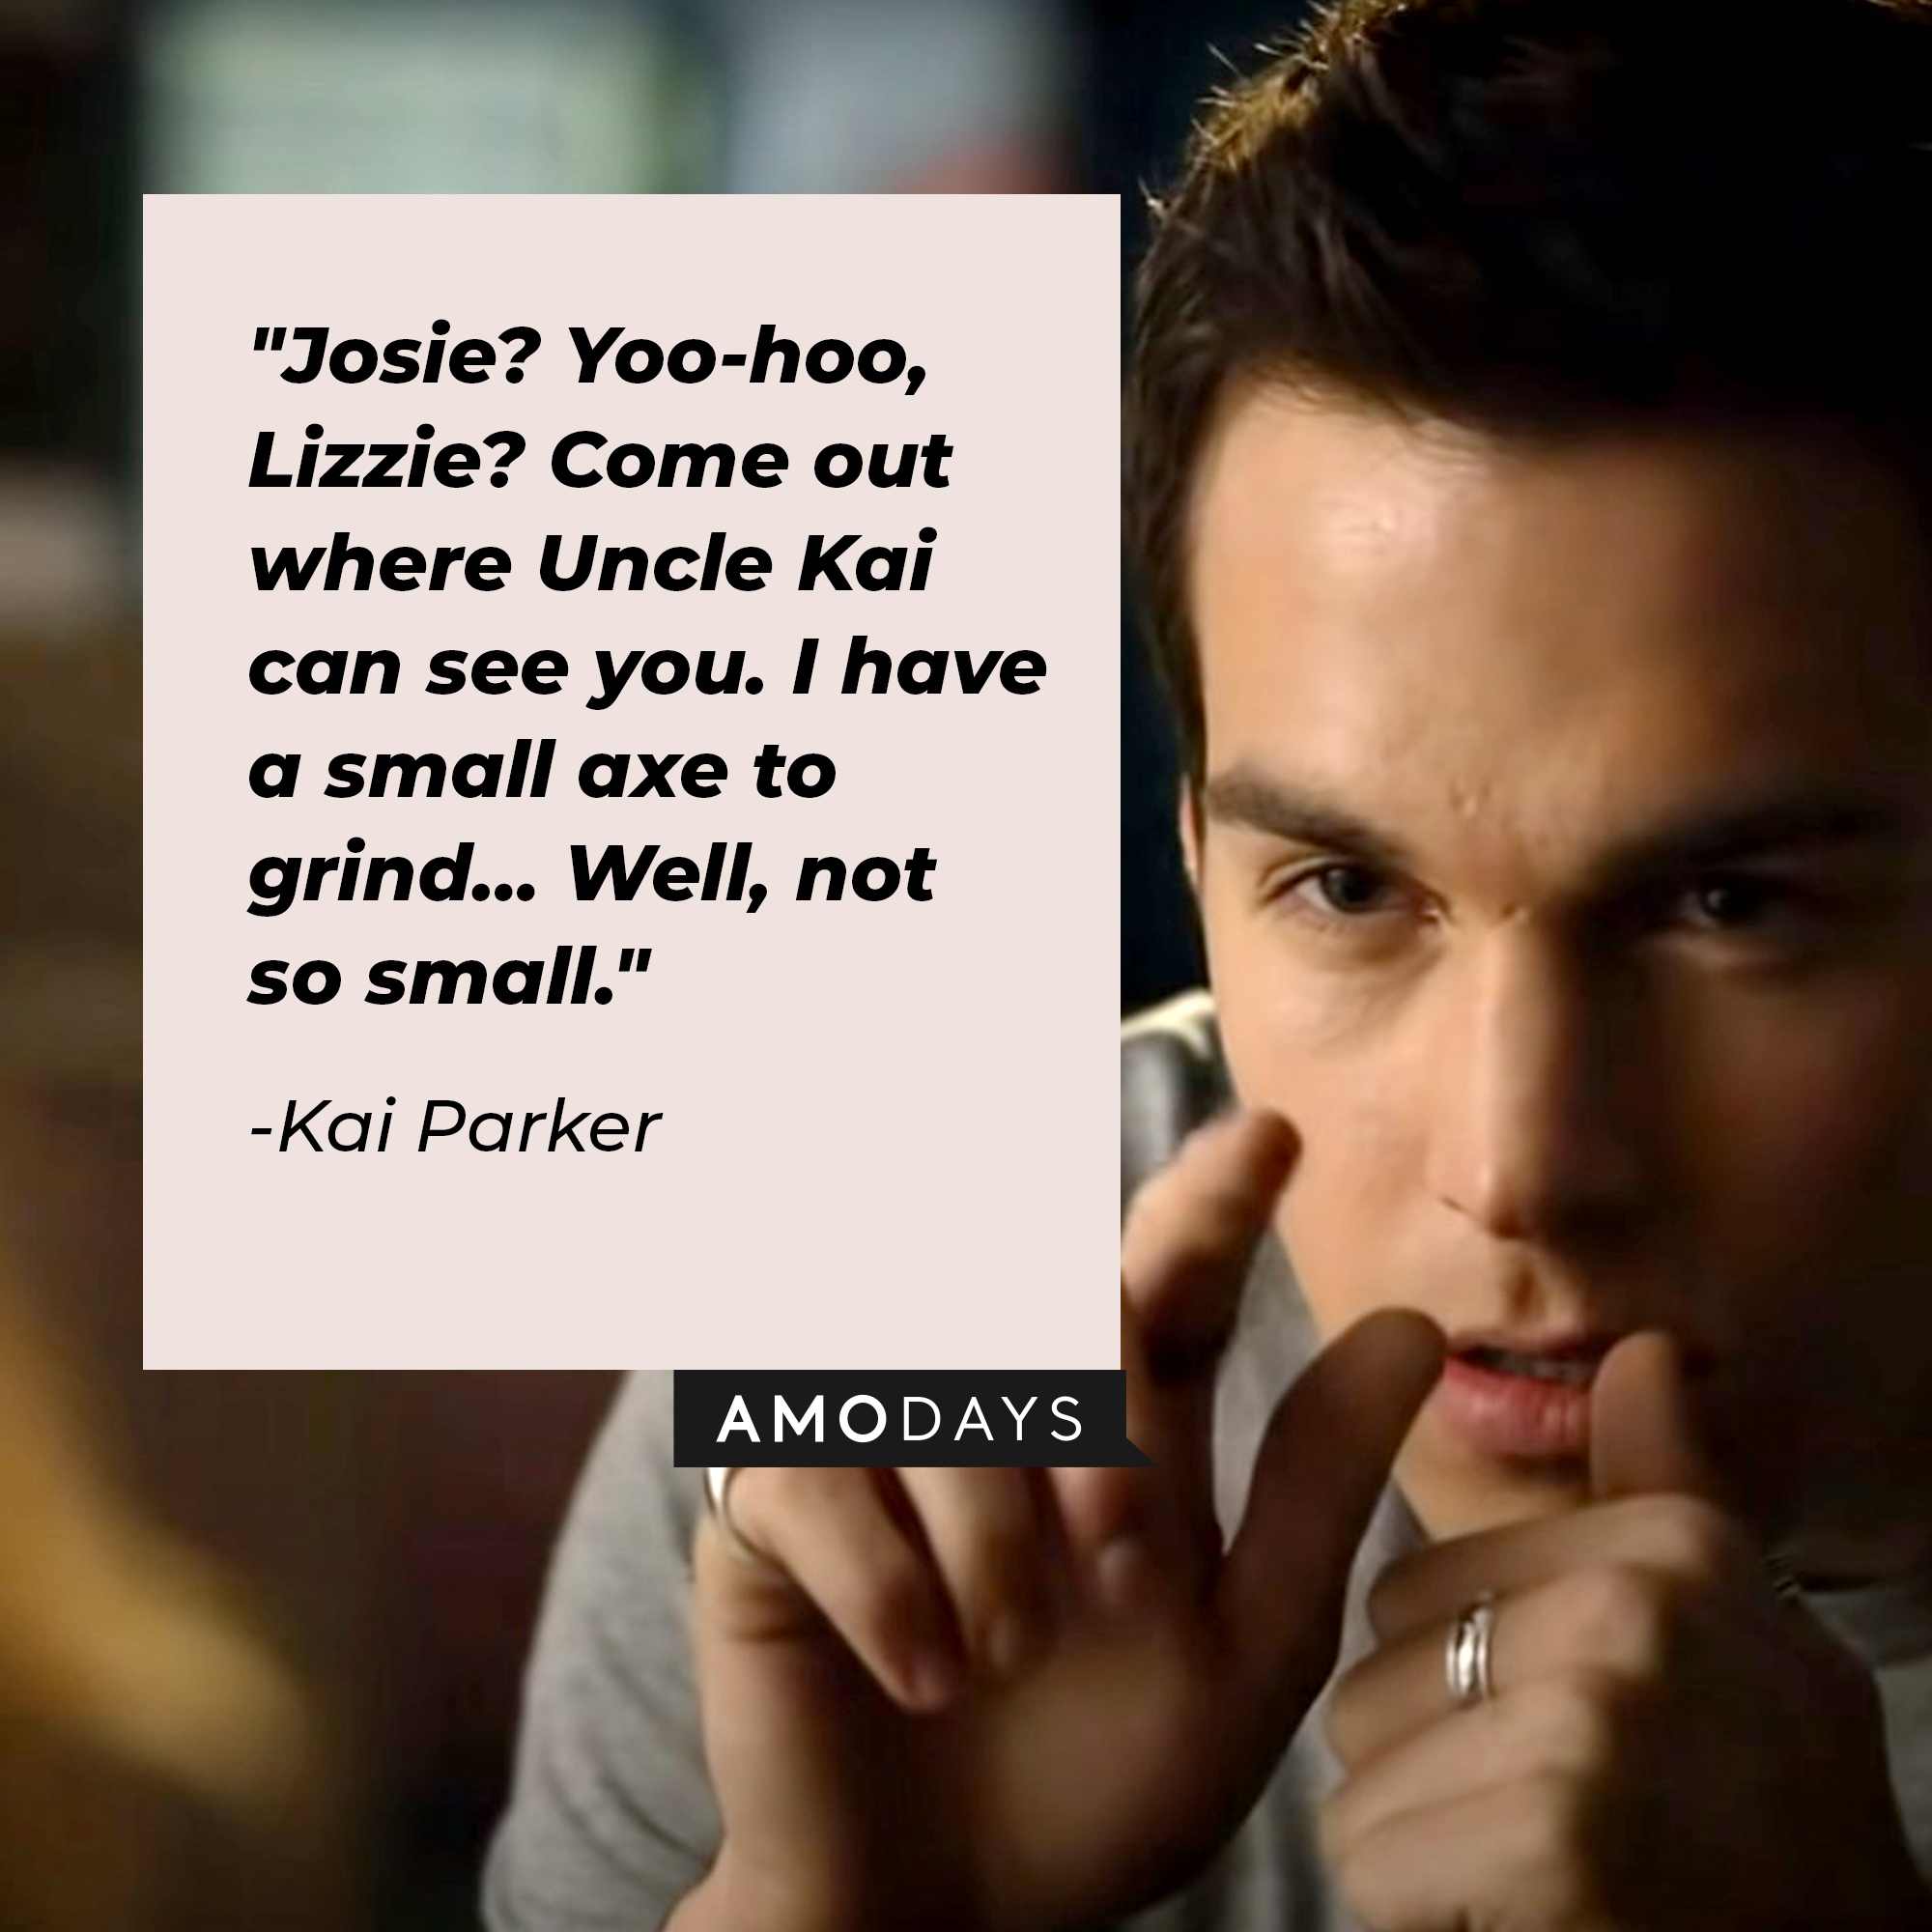 Kai Parker's quote: "Josie? Yoo-hoo, Lizzie? Come out where Uncle Kai can see you. I have a small axe to grind… Well, not so small." | Source: Facebook.com/thevampirediaries